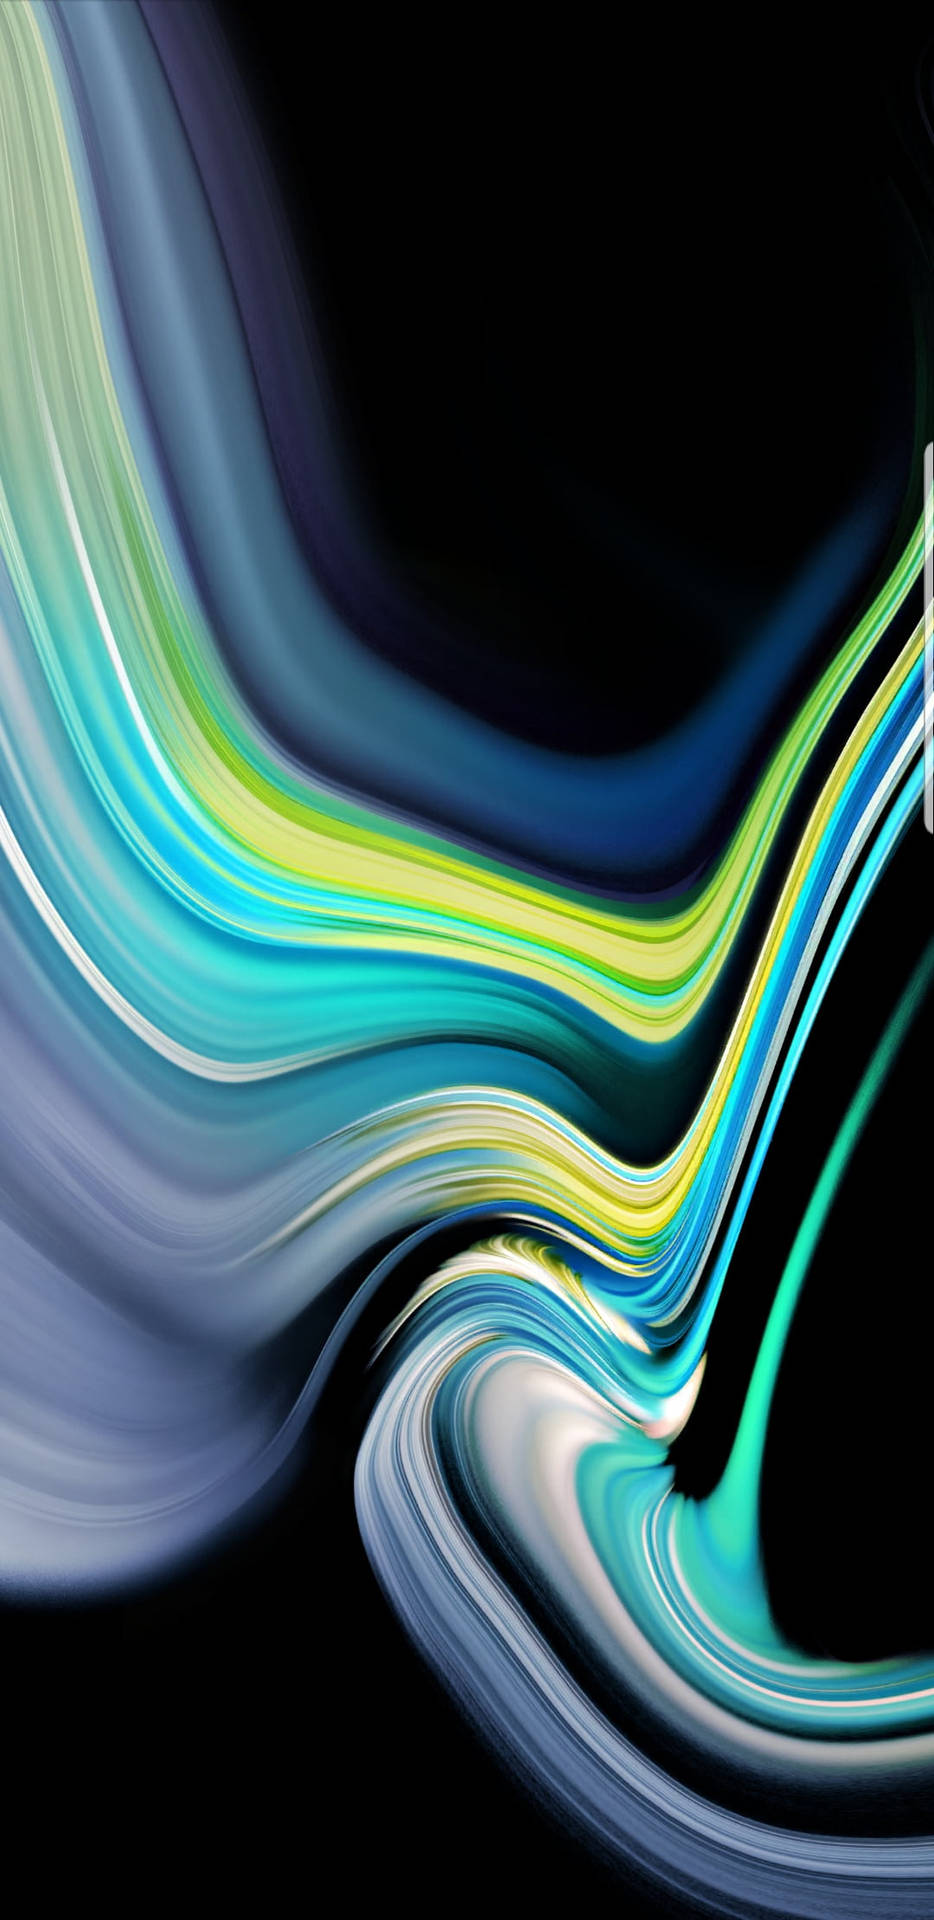 Note 5 HD Wallpaper (73+ images)